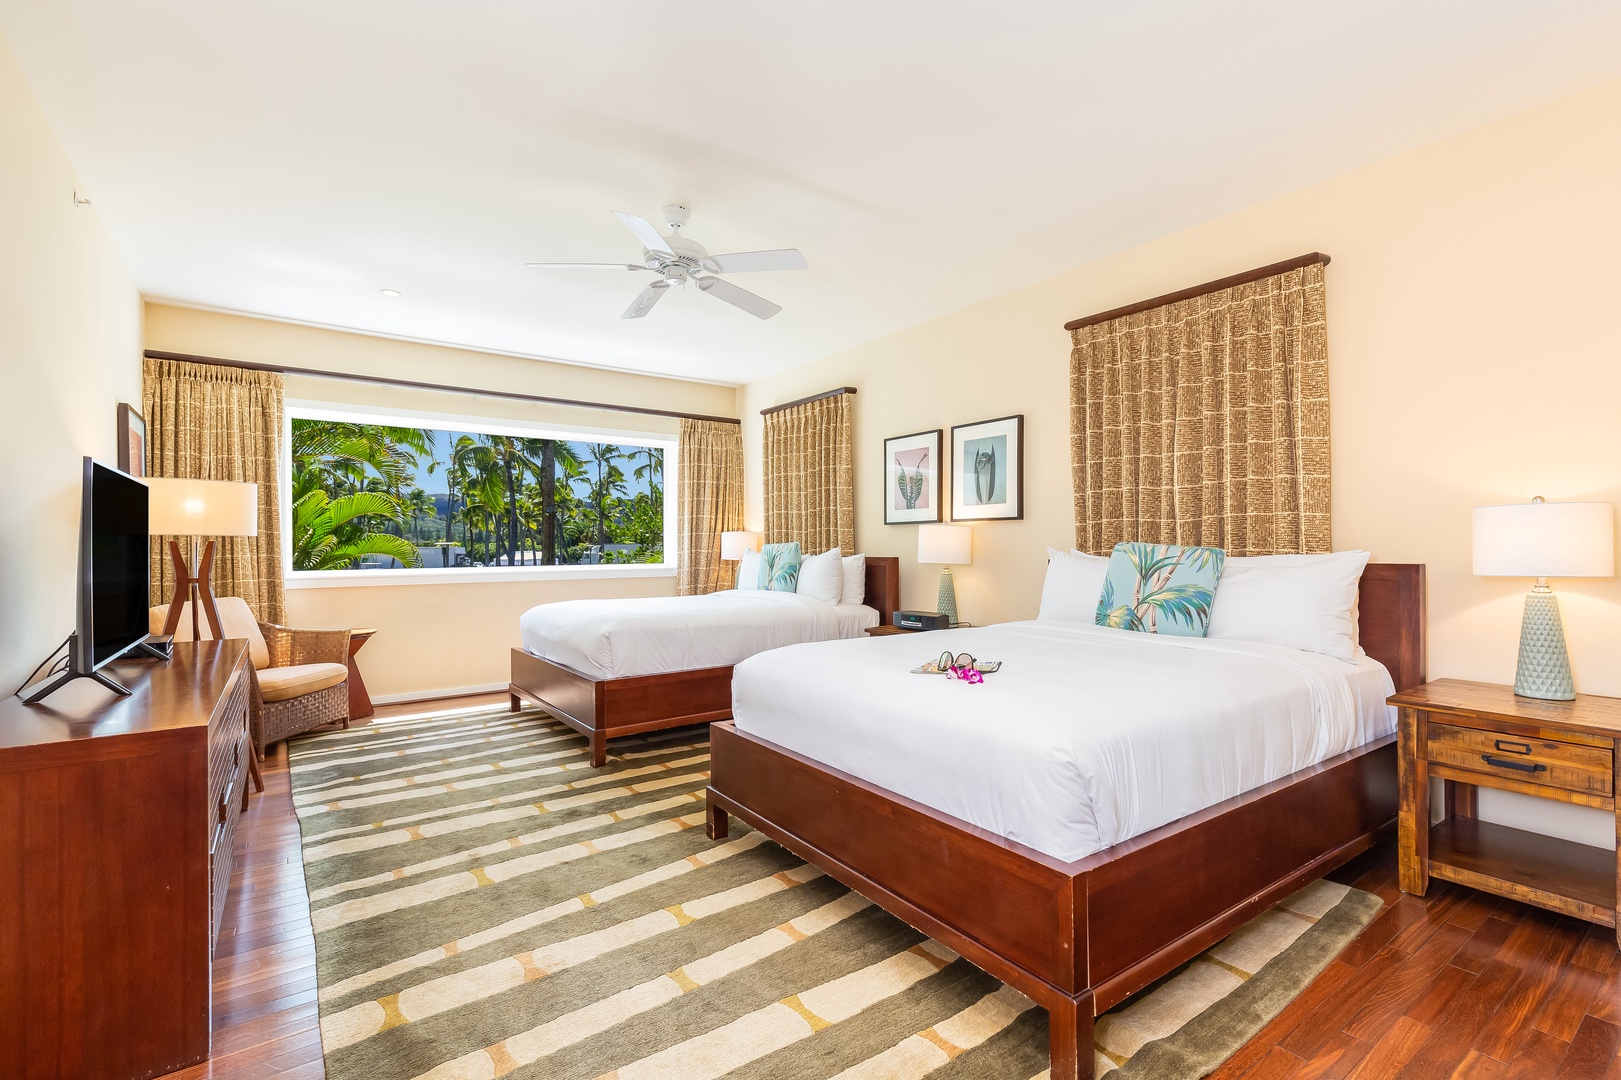 Kahuku Vacation Rentals, Turtle Bay Villas 201 - guest bedroom with 2 Queen-size beds. For added flexibility, the living room also has a full-size sleeper sofa for additional space.